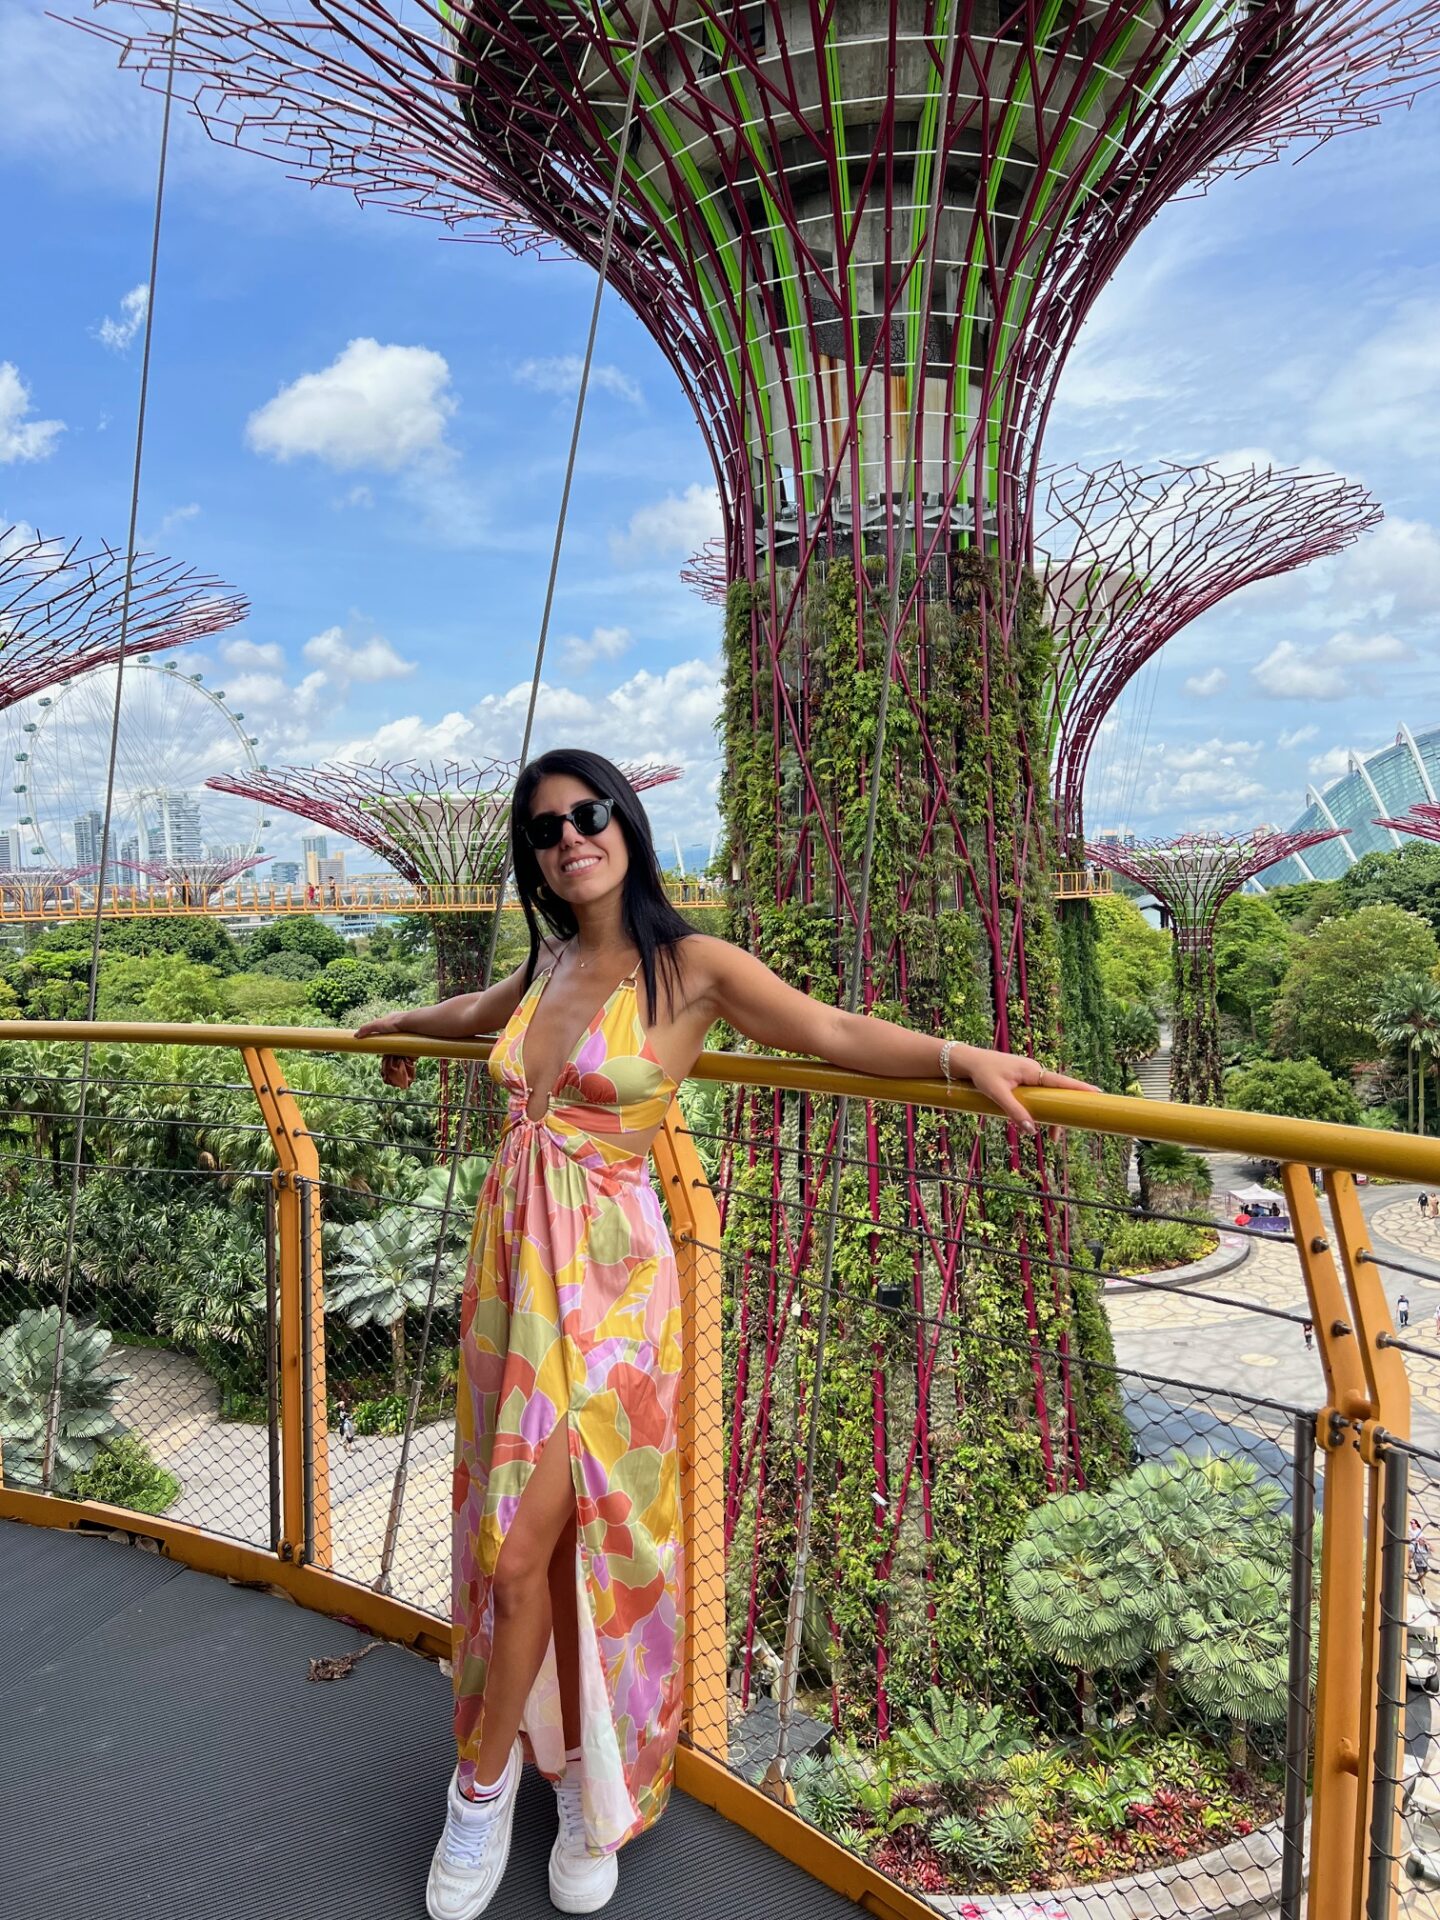 SINGAPORE: THE MOST COLORFUL DESTINATION I HAVE EVER BEEN